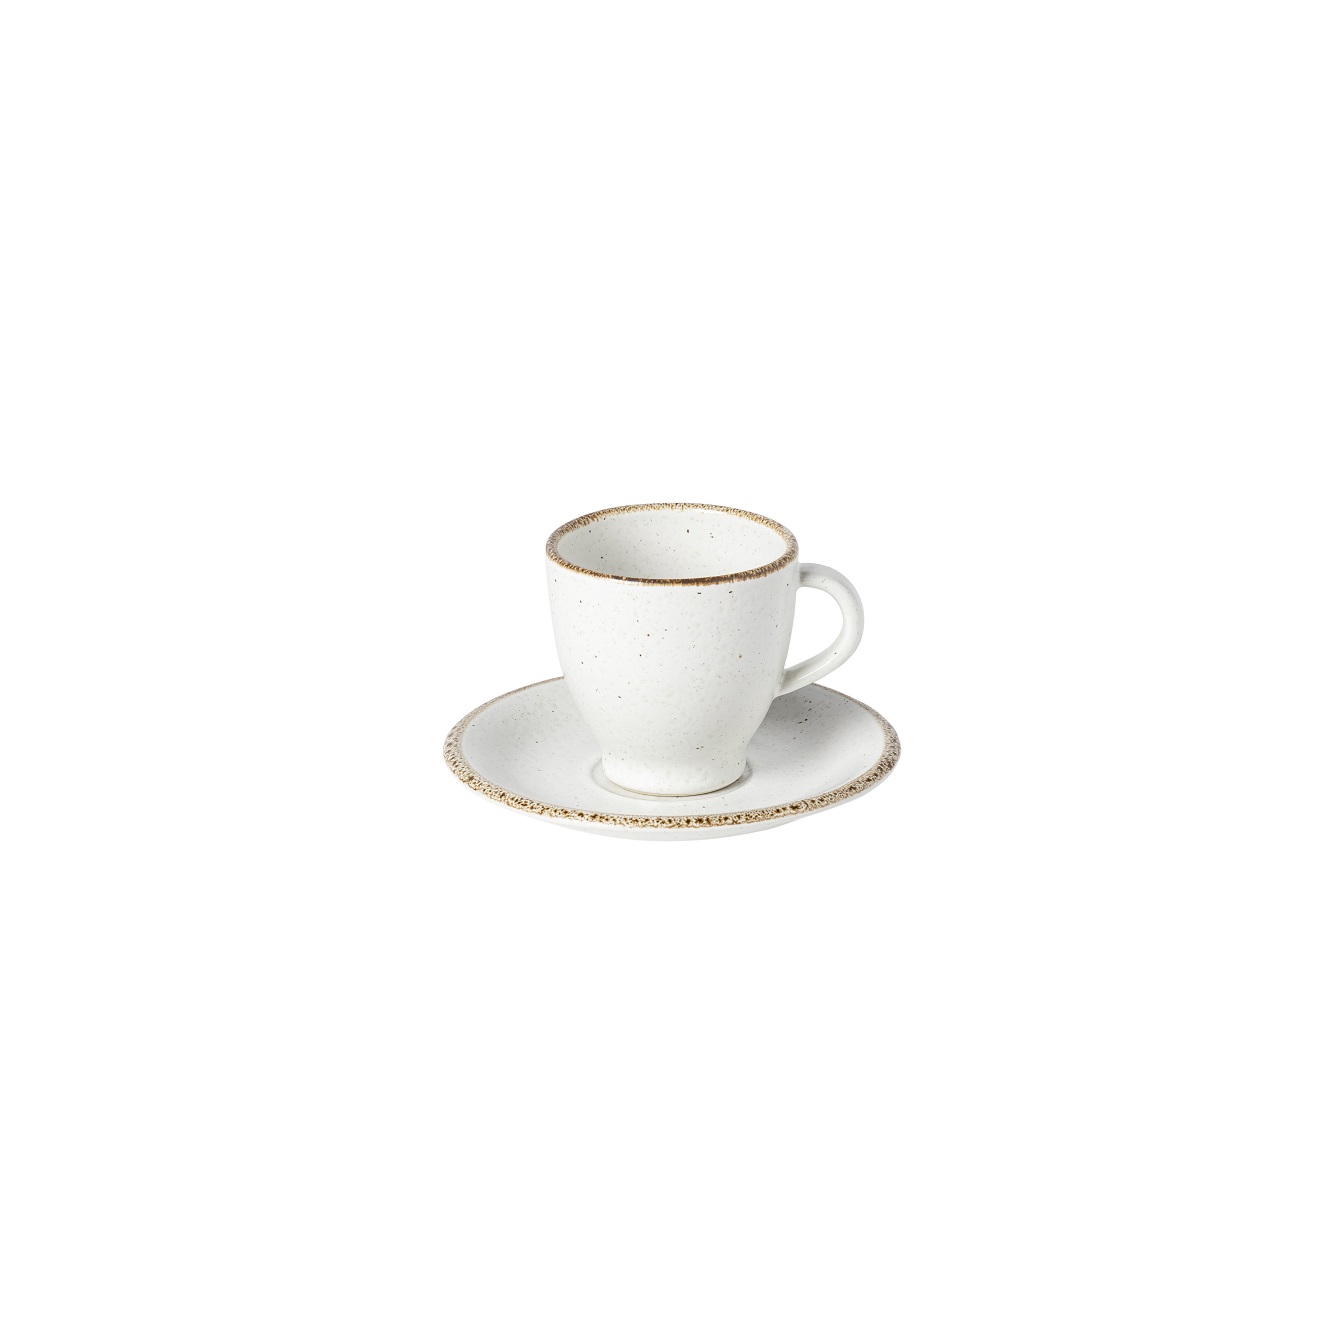 Positano White Coffee Cup & Saucer 0.08l Gift